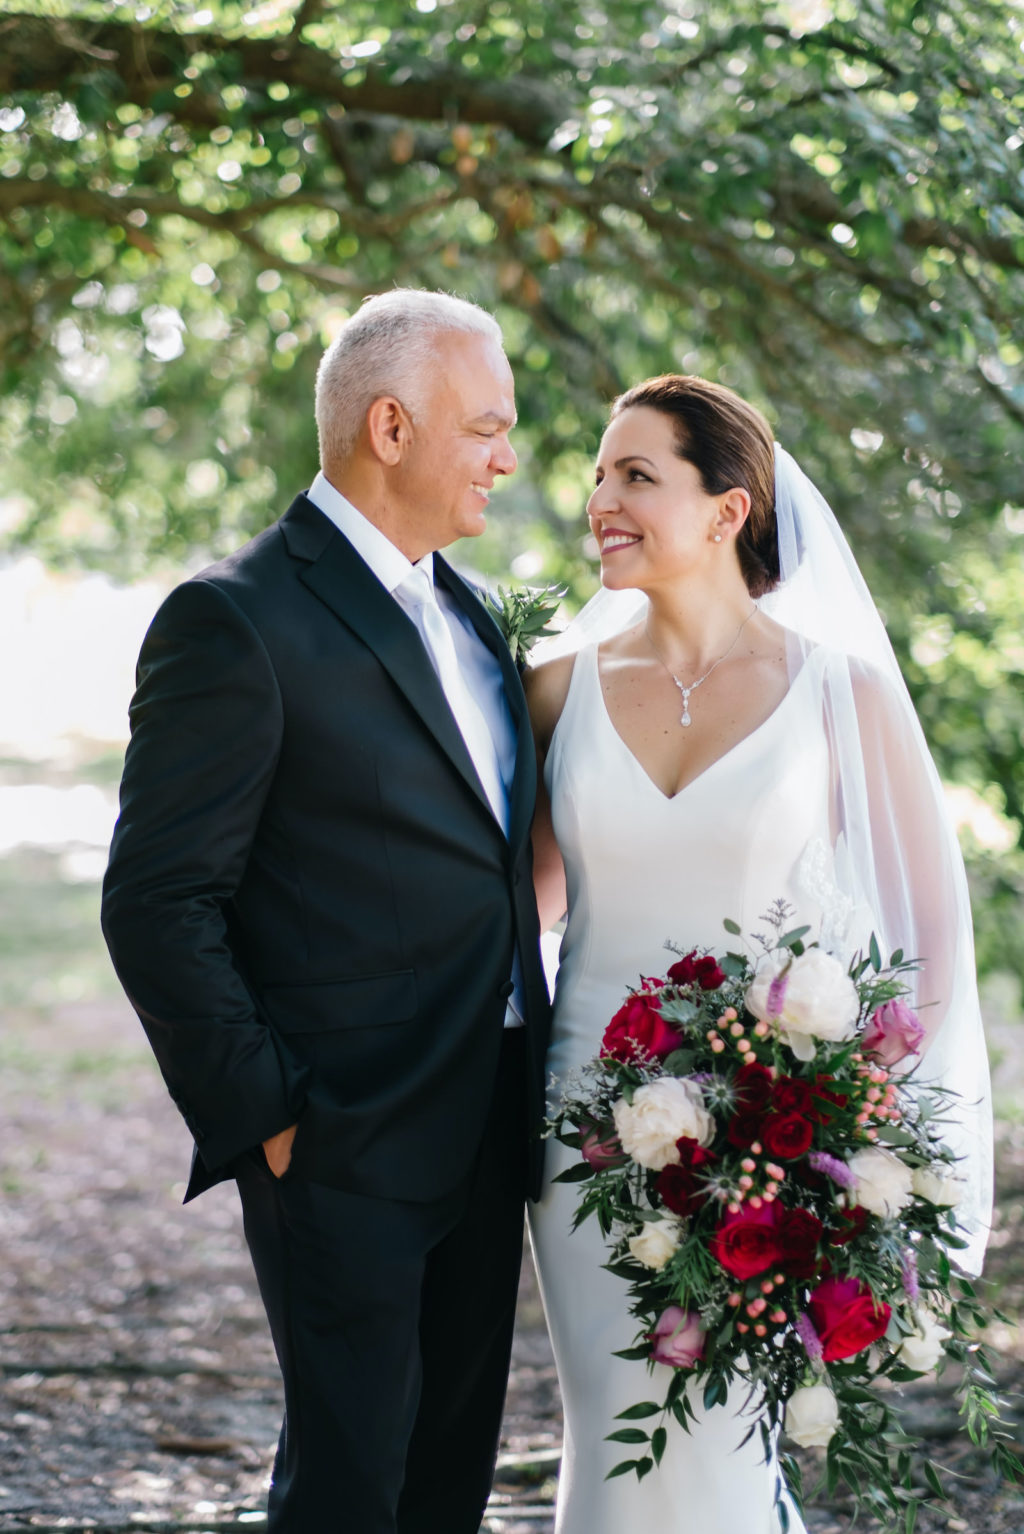 Sophisticated, Tampa Bay Bride, and Groom, Holding Vibrant Jewel Toned Floral Bouquet with Bright Pink Roses, Ivory, Purple, and Blue Flowers | Florida Wedding Planner Breezin' Weddings | South Tampa Outside The Box Event Rentals